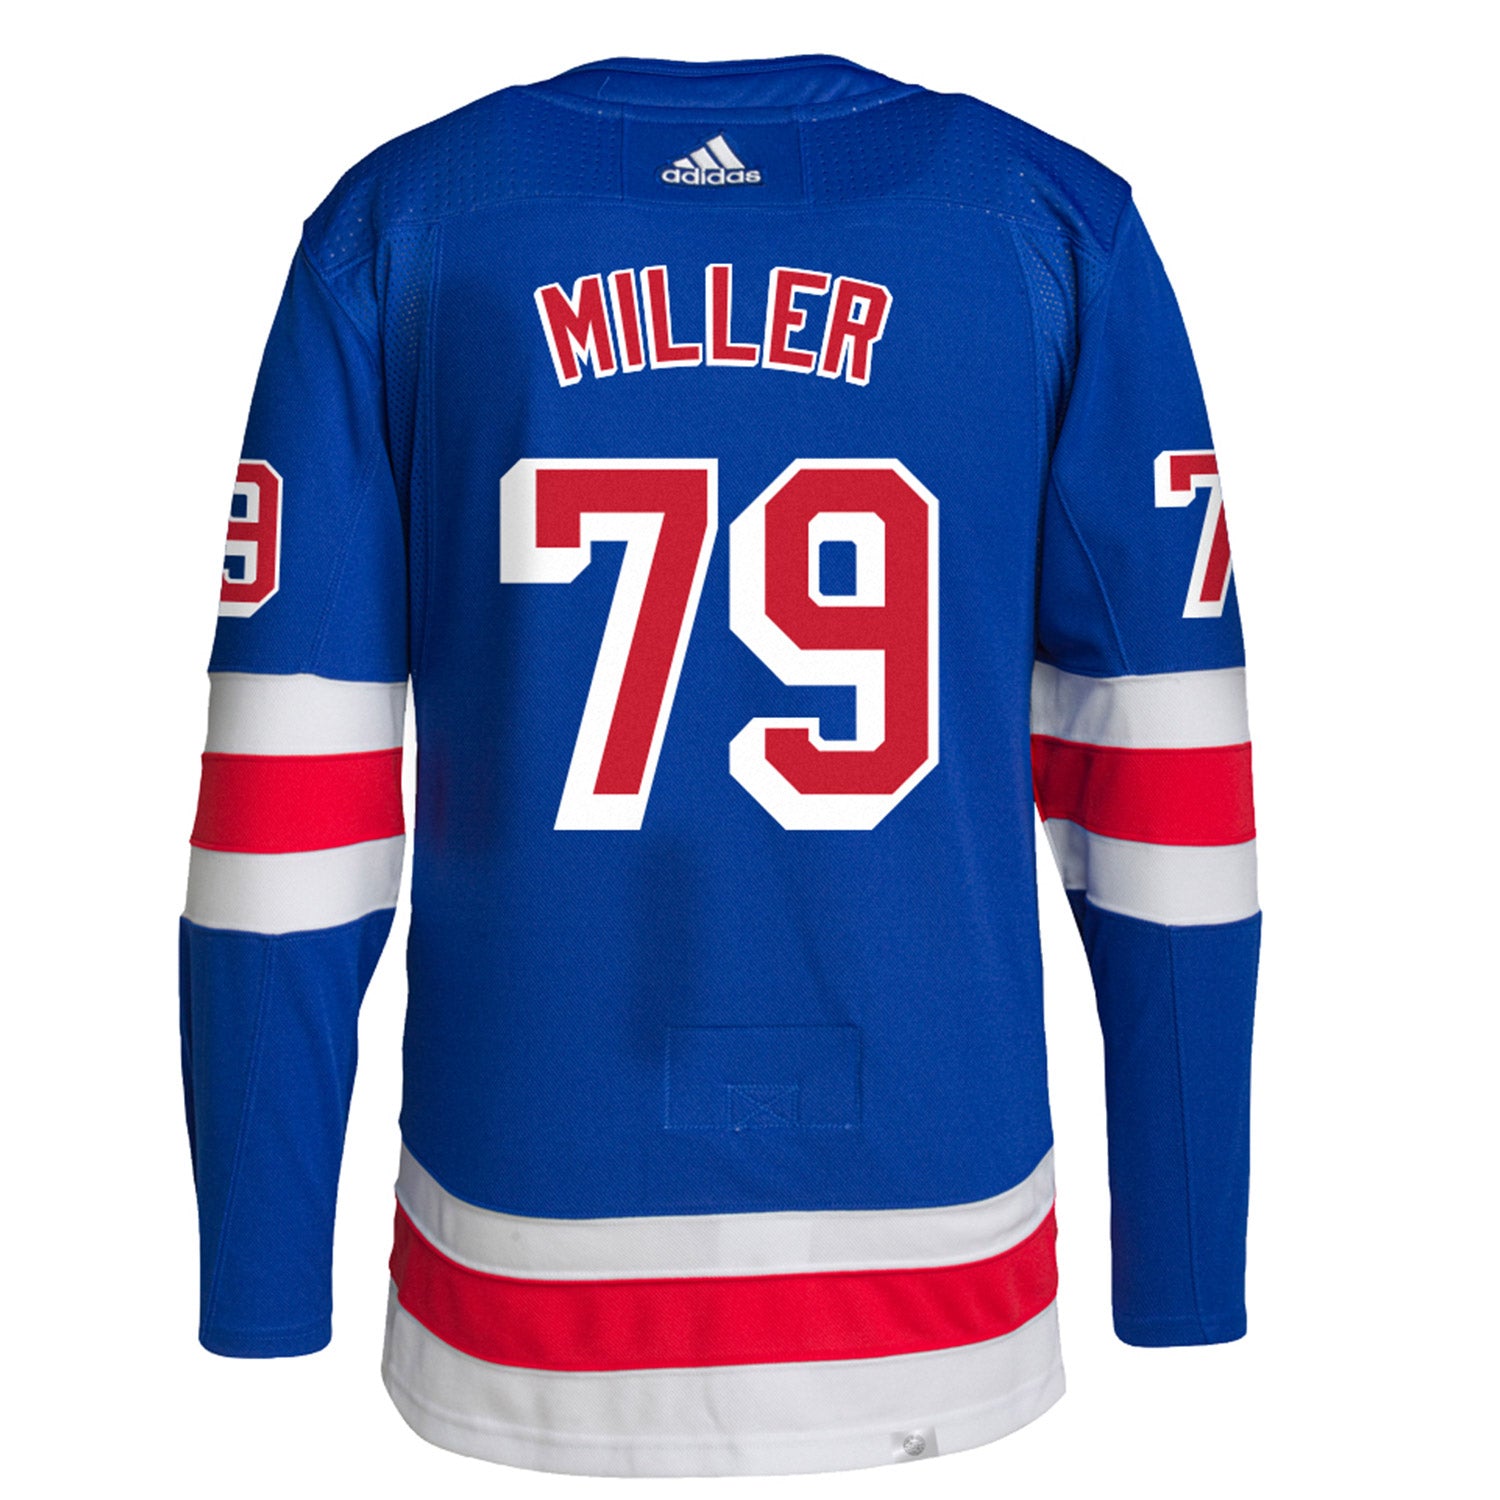 Detailed NHL Adidas Authentic Jersey Sizing Measurements !! 